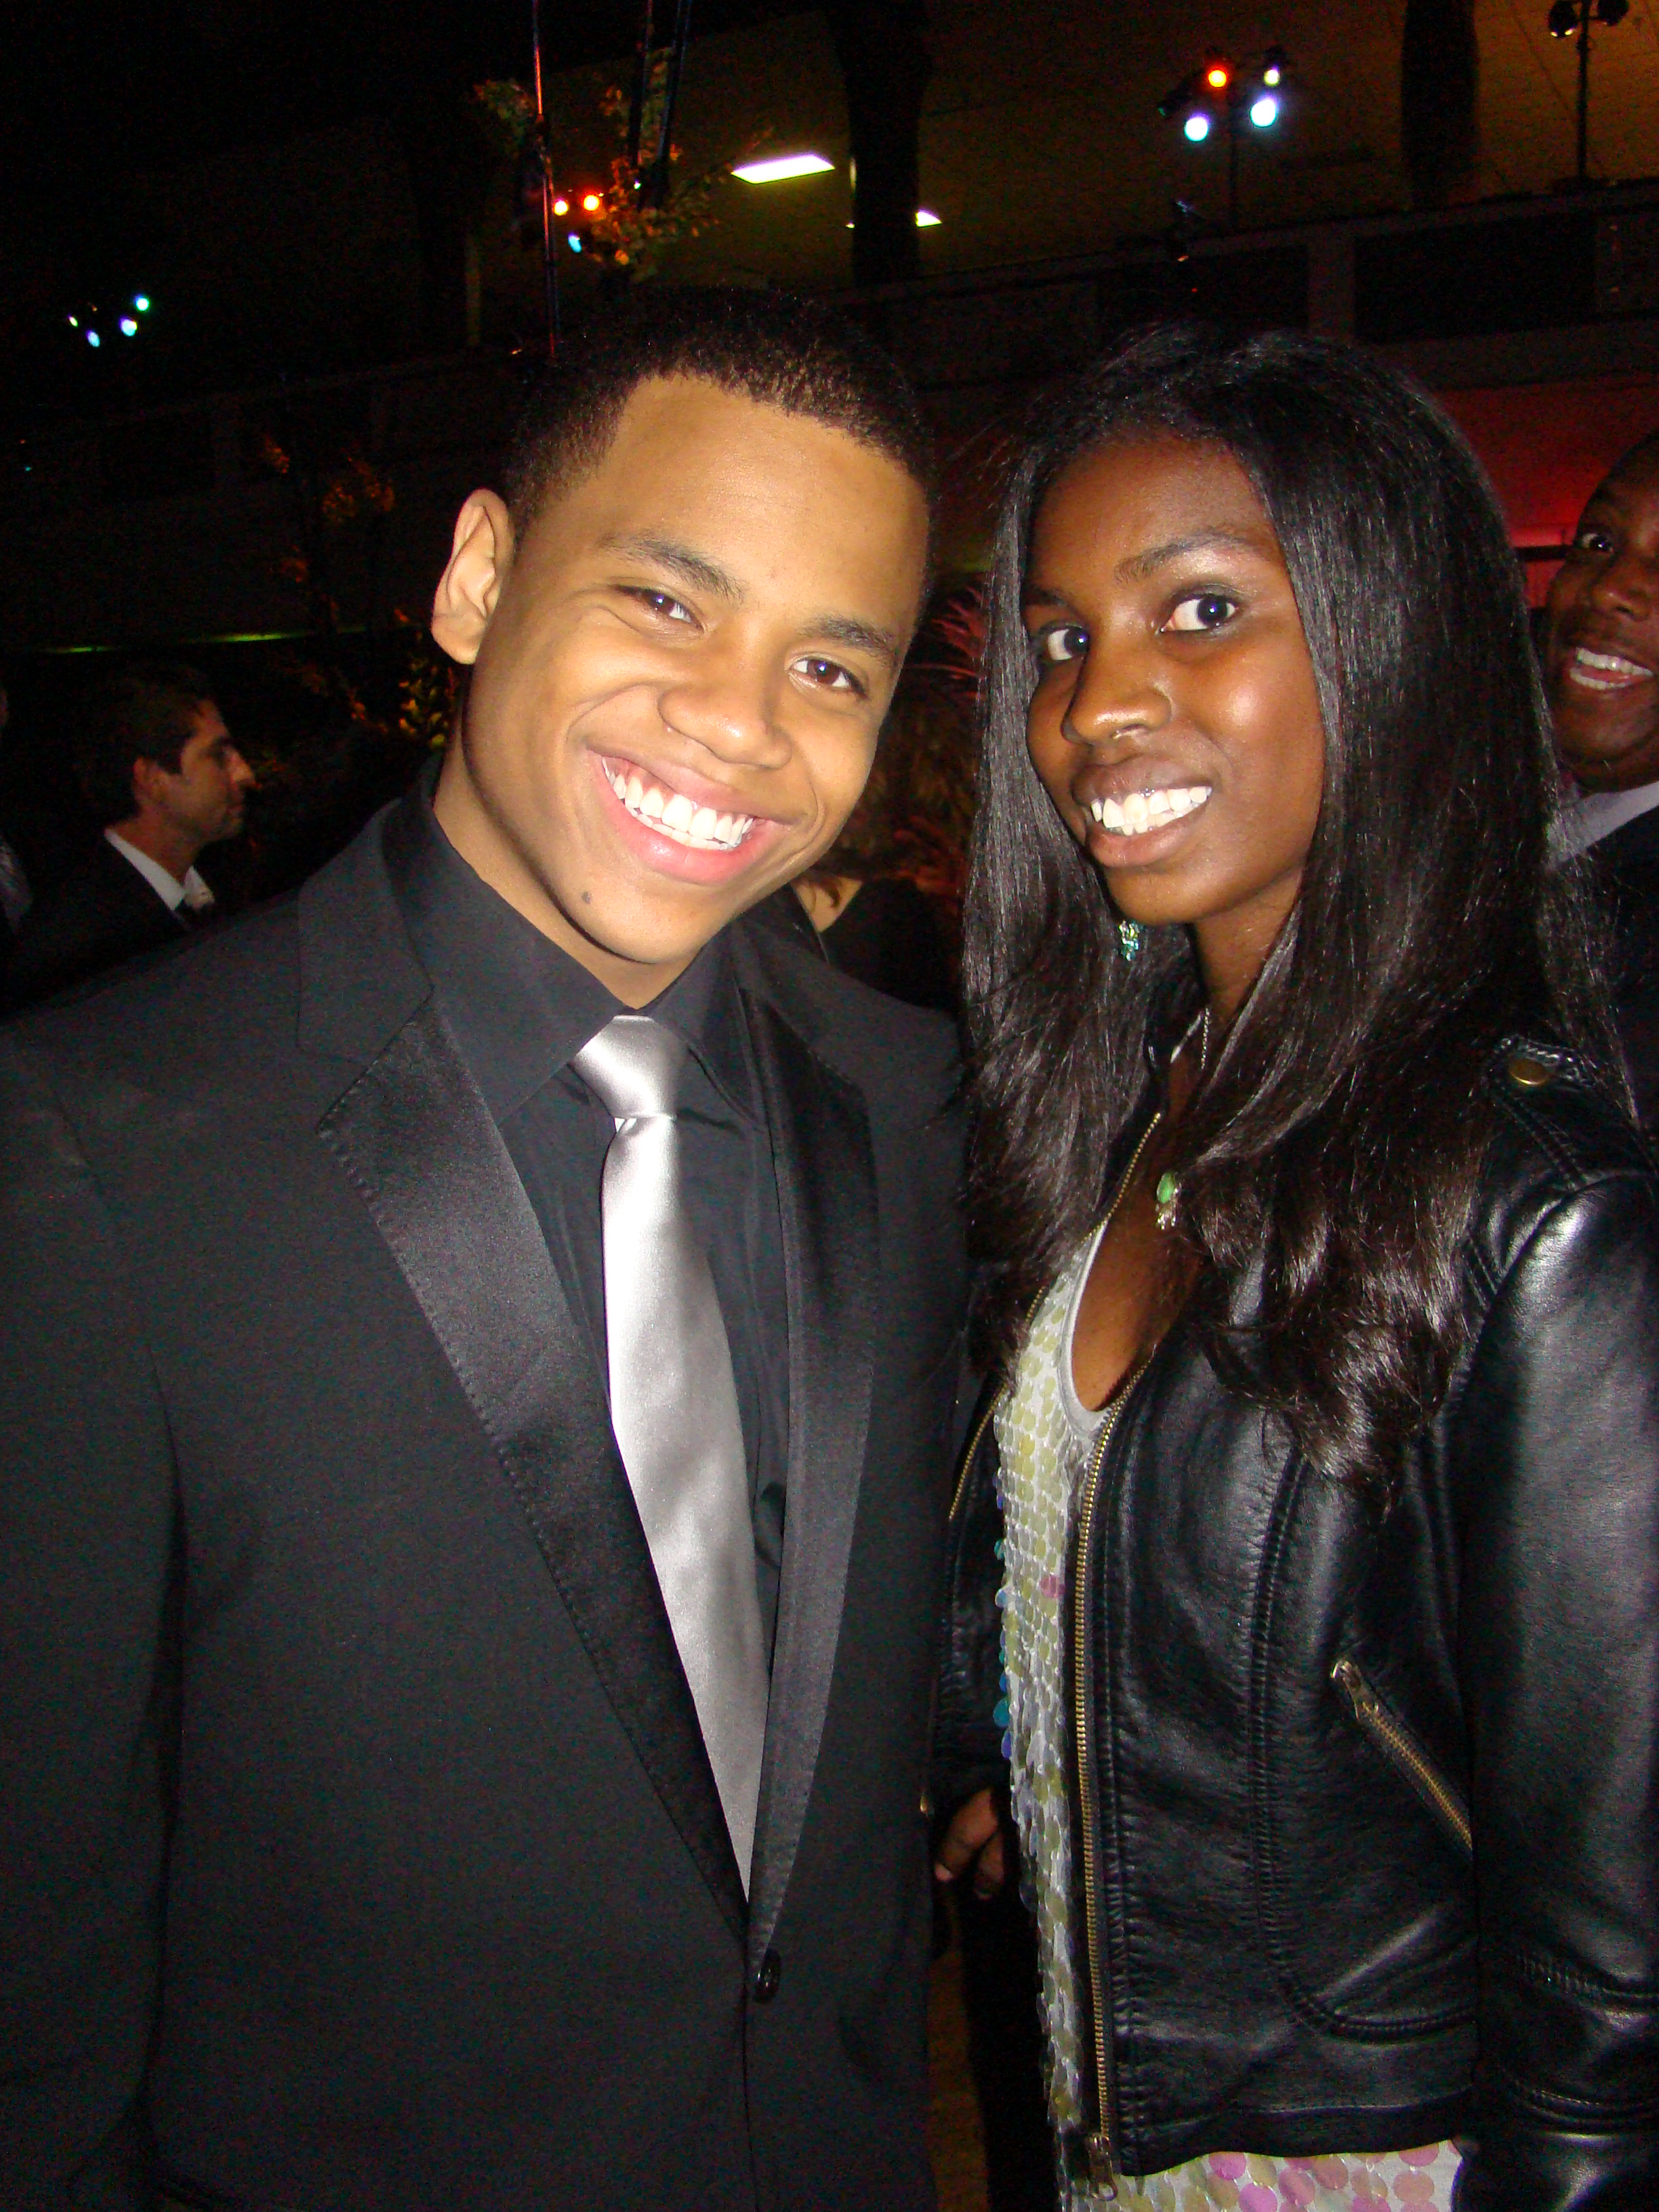 General photo of Tristan Wilds